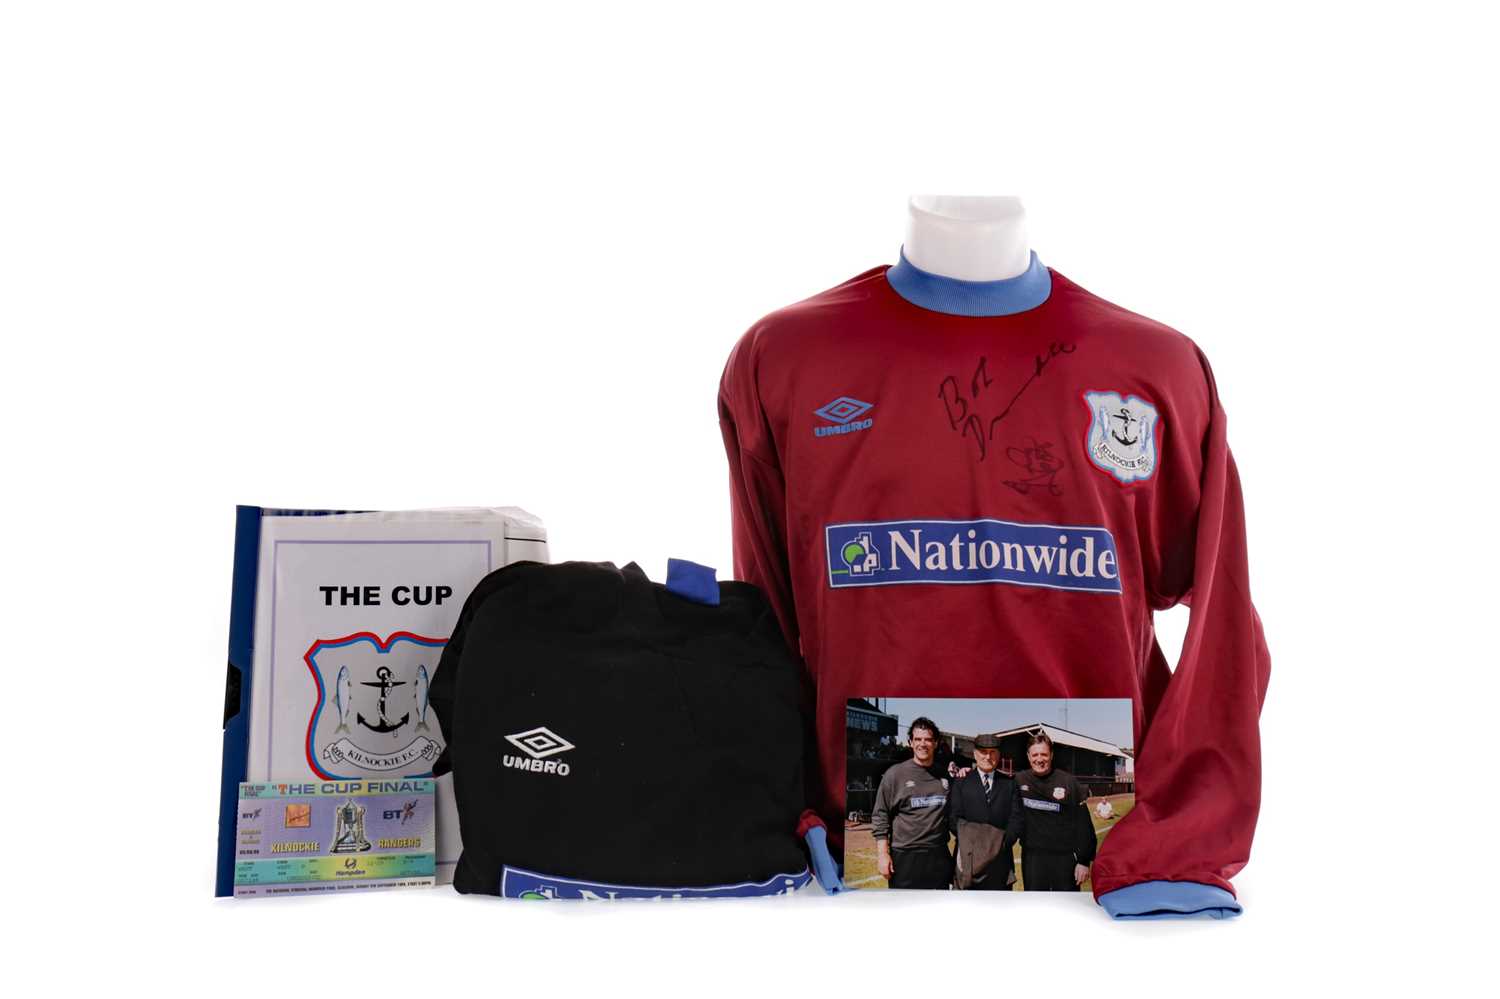 Lot 1718 - A KILNOCKIE F.C. JERSEY SIGNED BY ALLY MCCOIST AND ROBERT DUVAL, ALONG WITH OTHER ITEMS